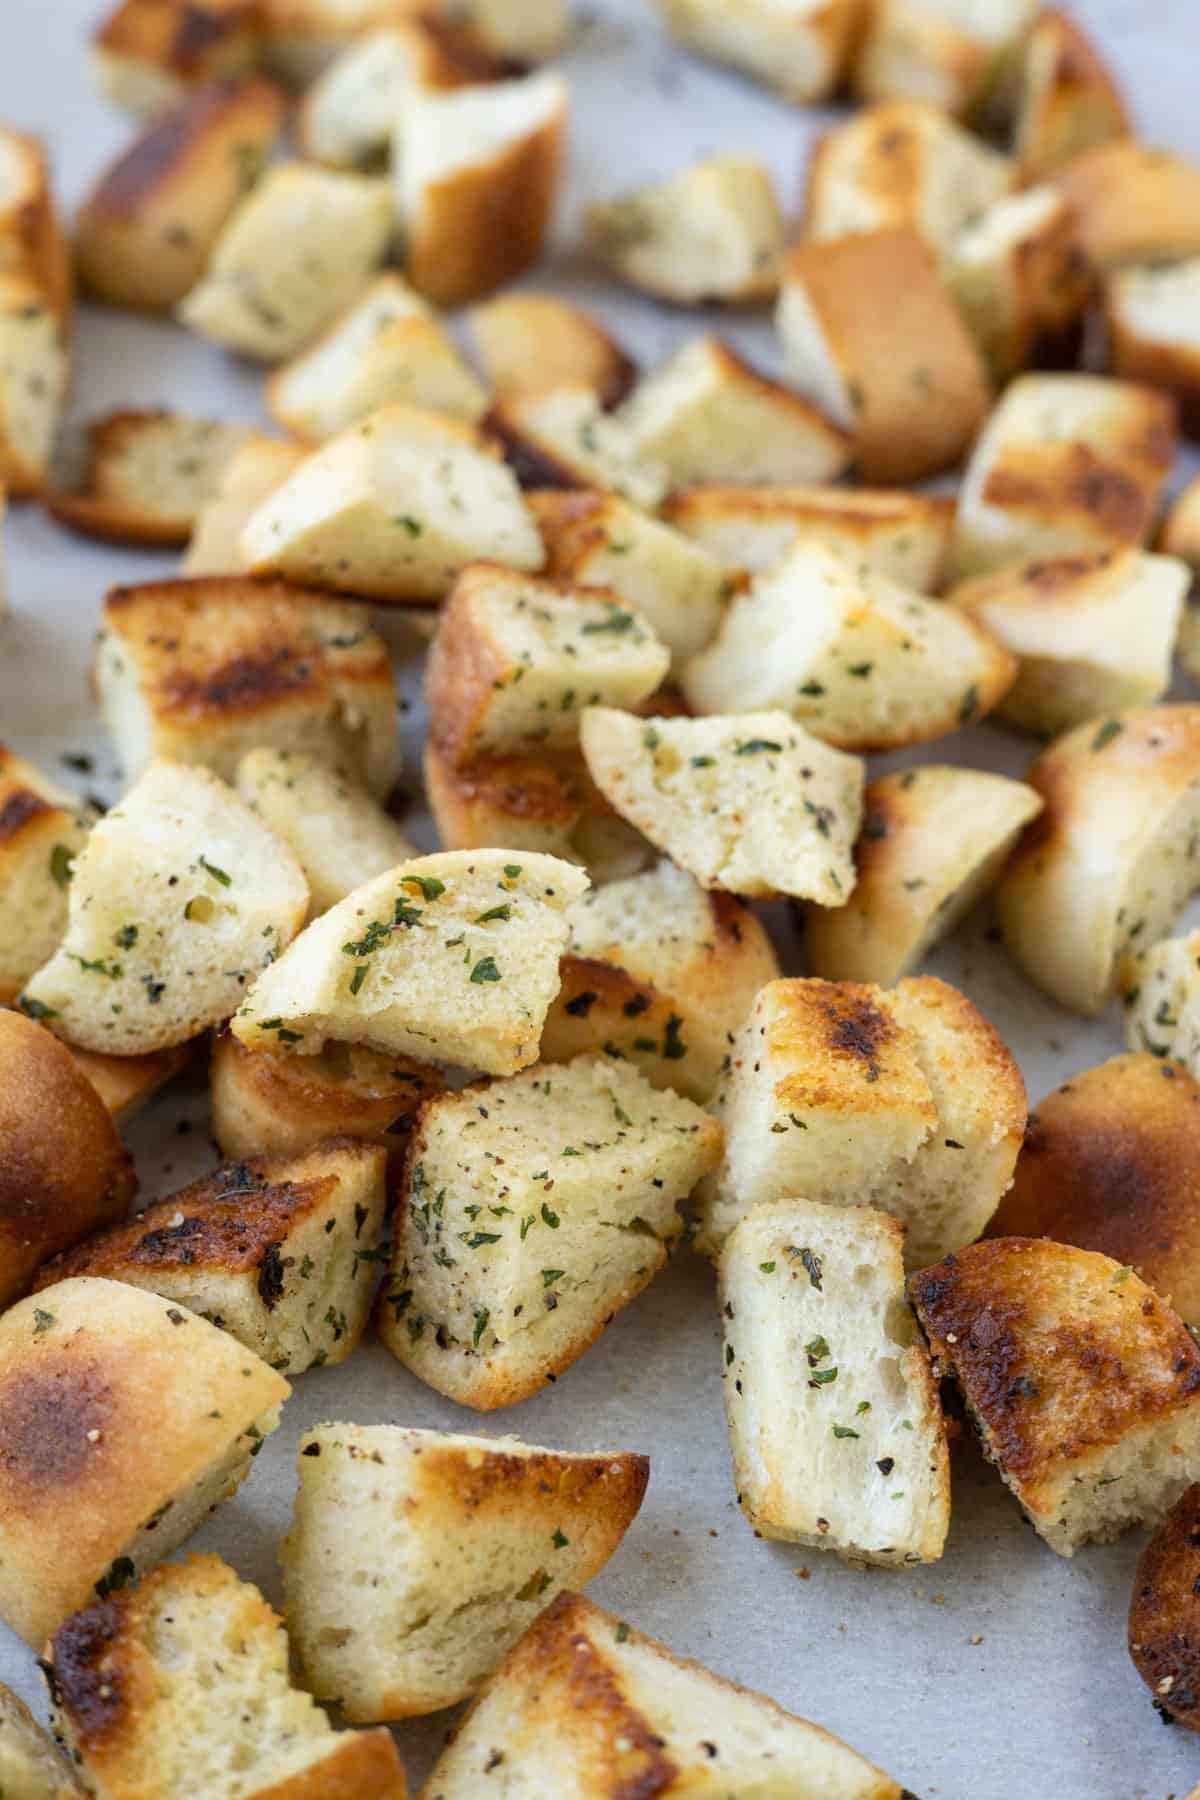 Baked garlic and butter croutons with herbs.